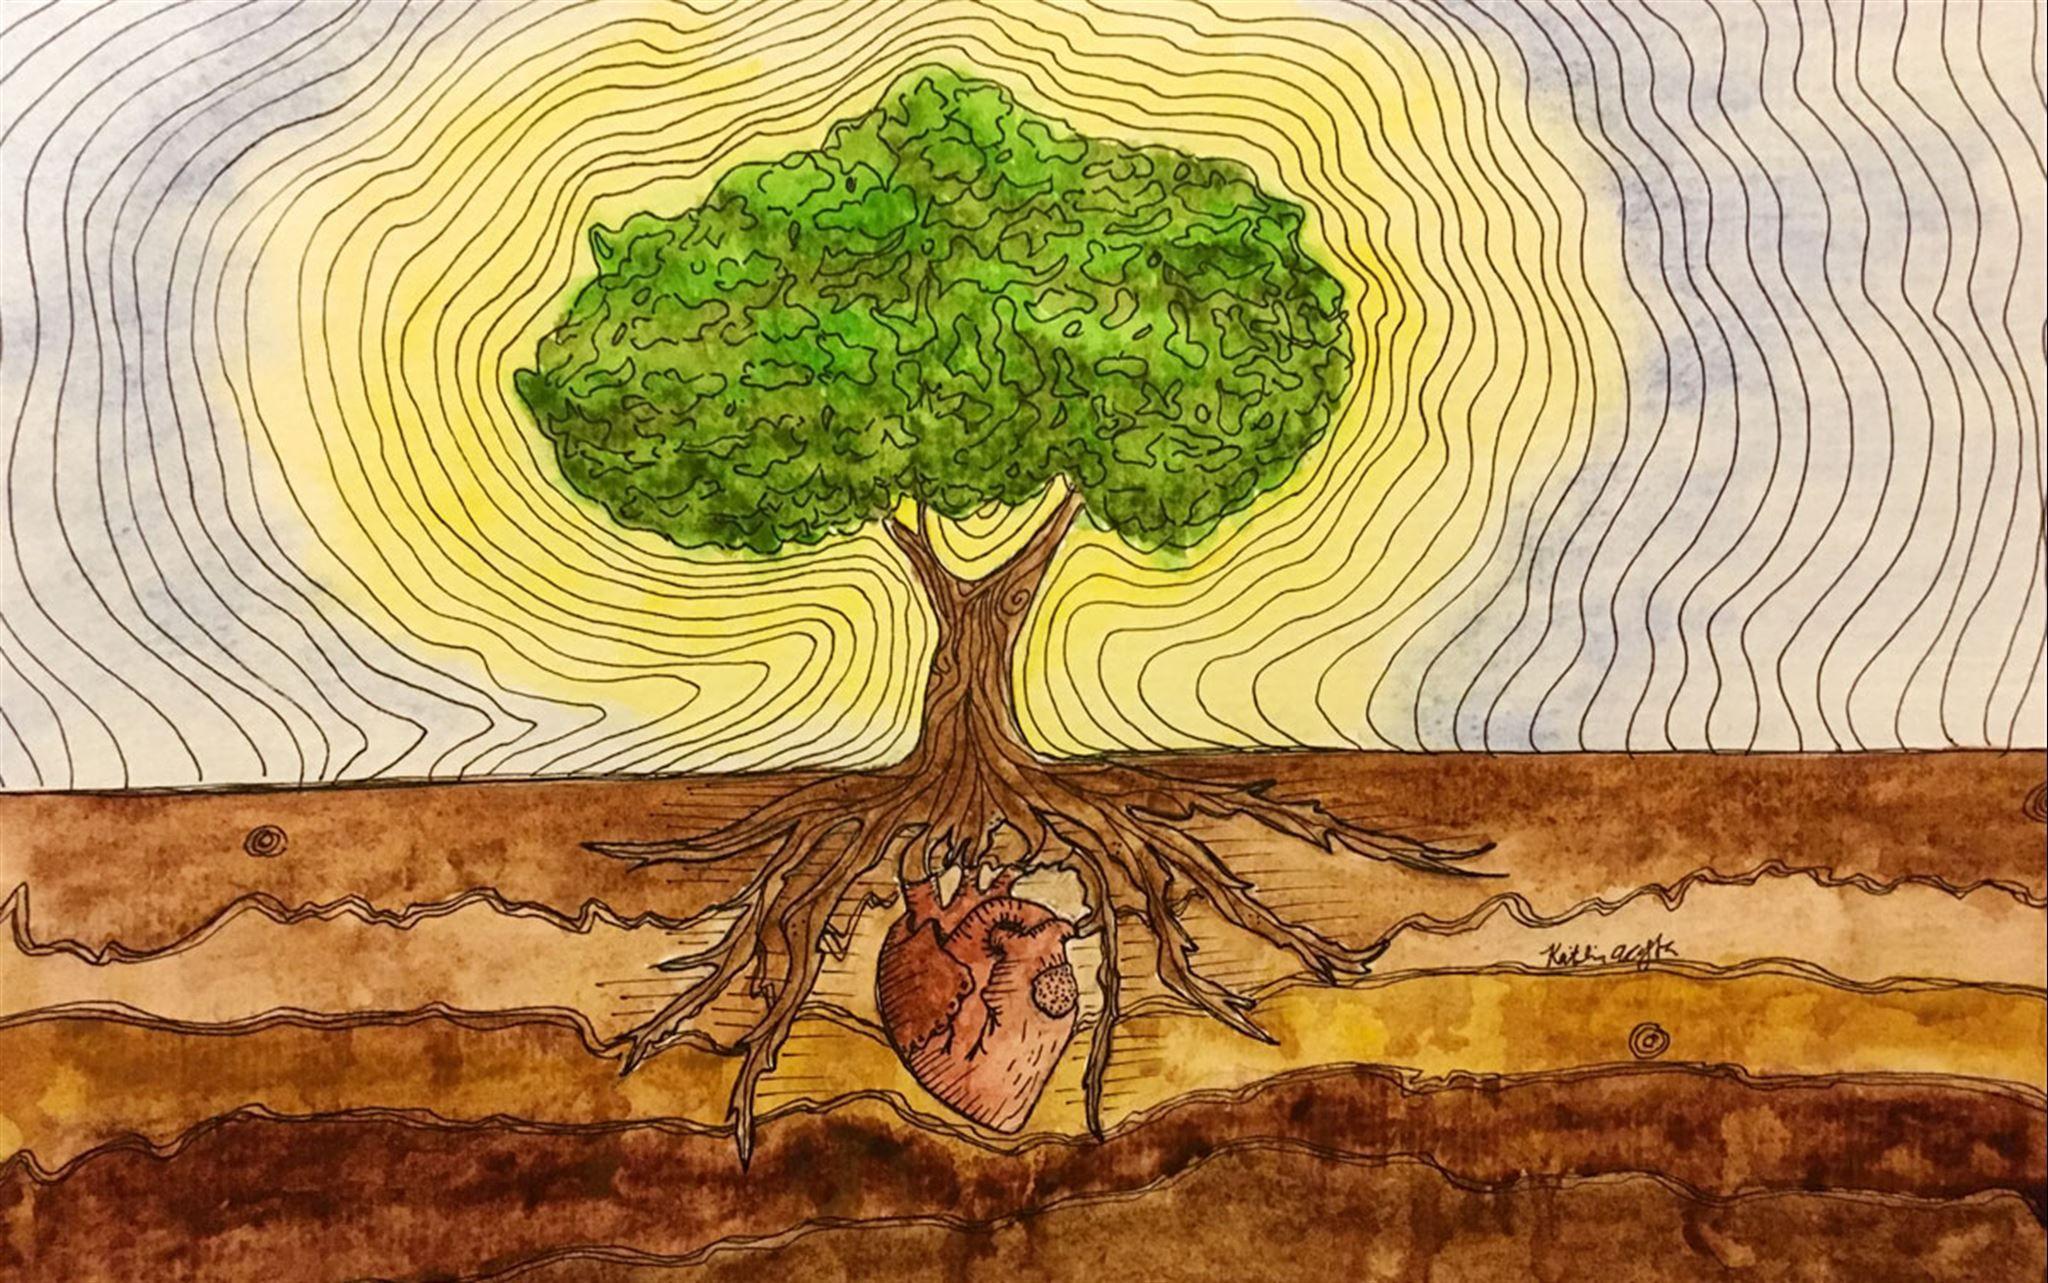 A drawing of a tree growing out of a heart